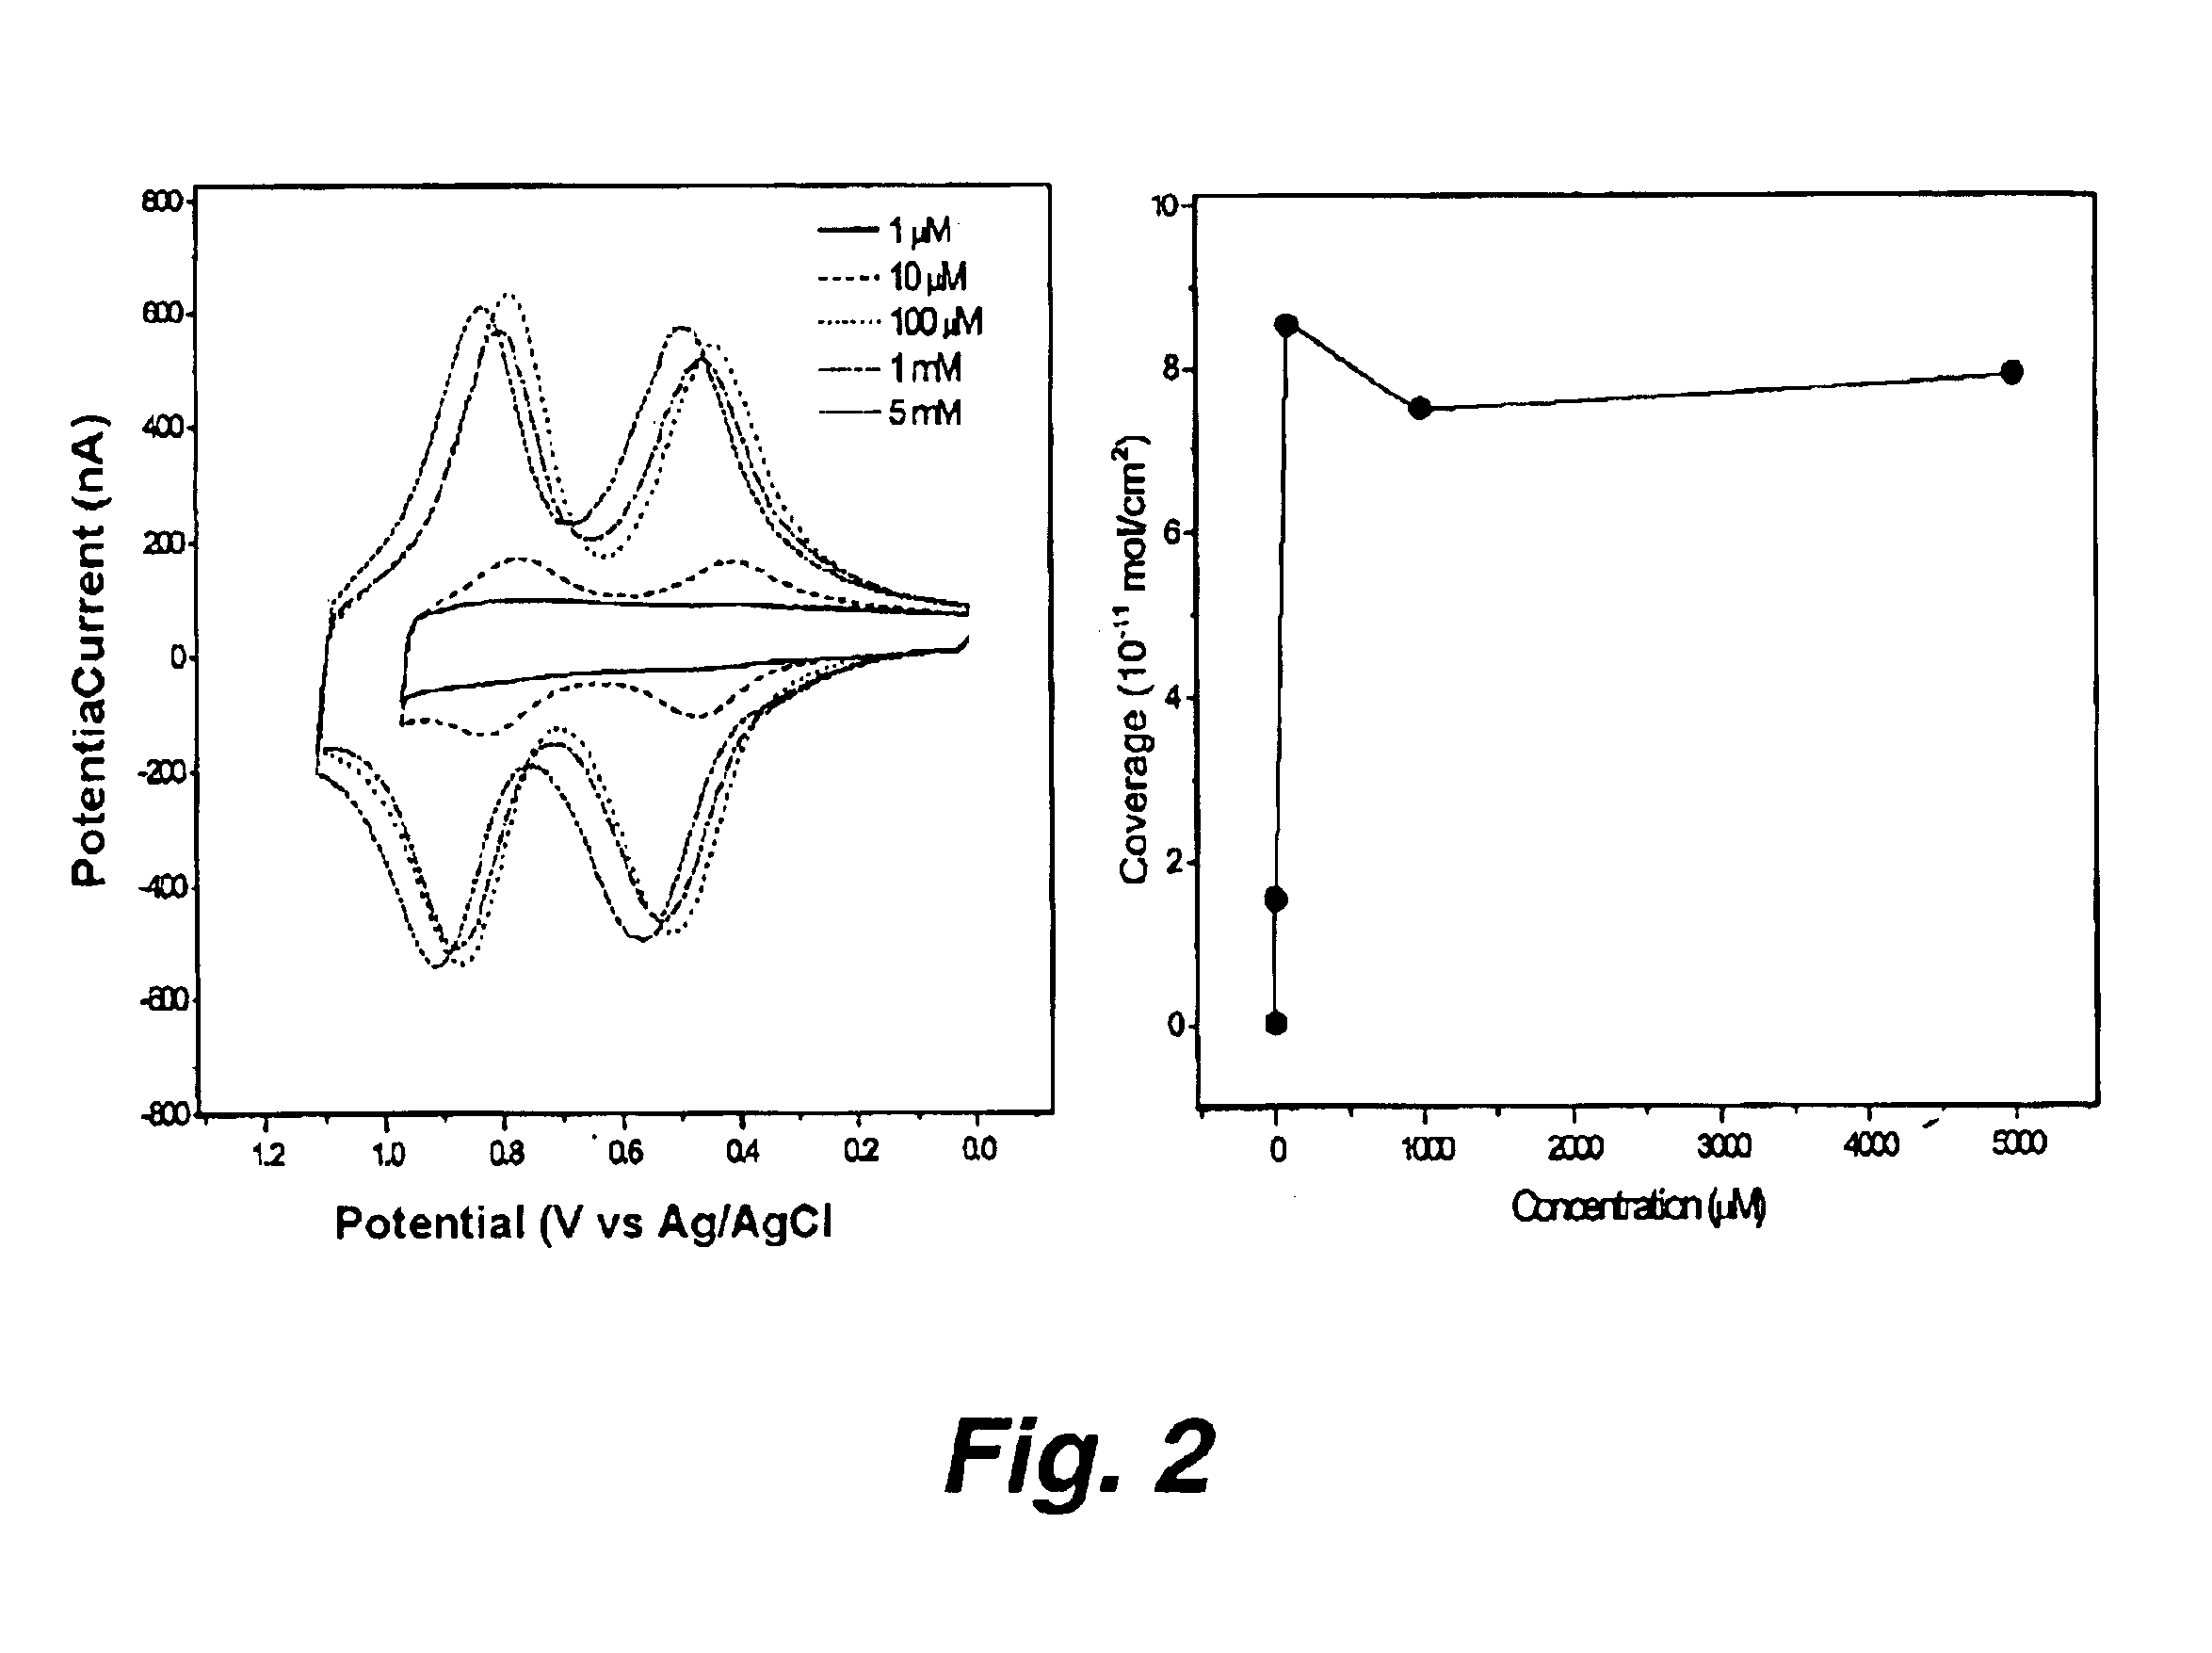 Attachment of organic molecules to group III, IV or V substrates